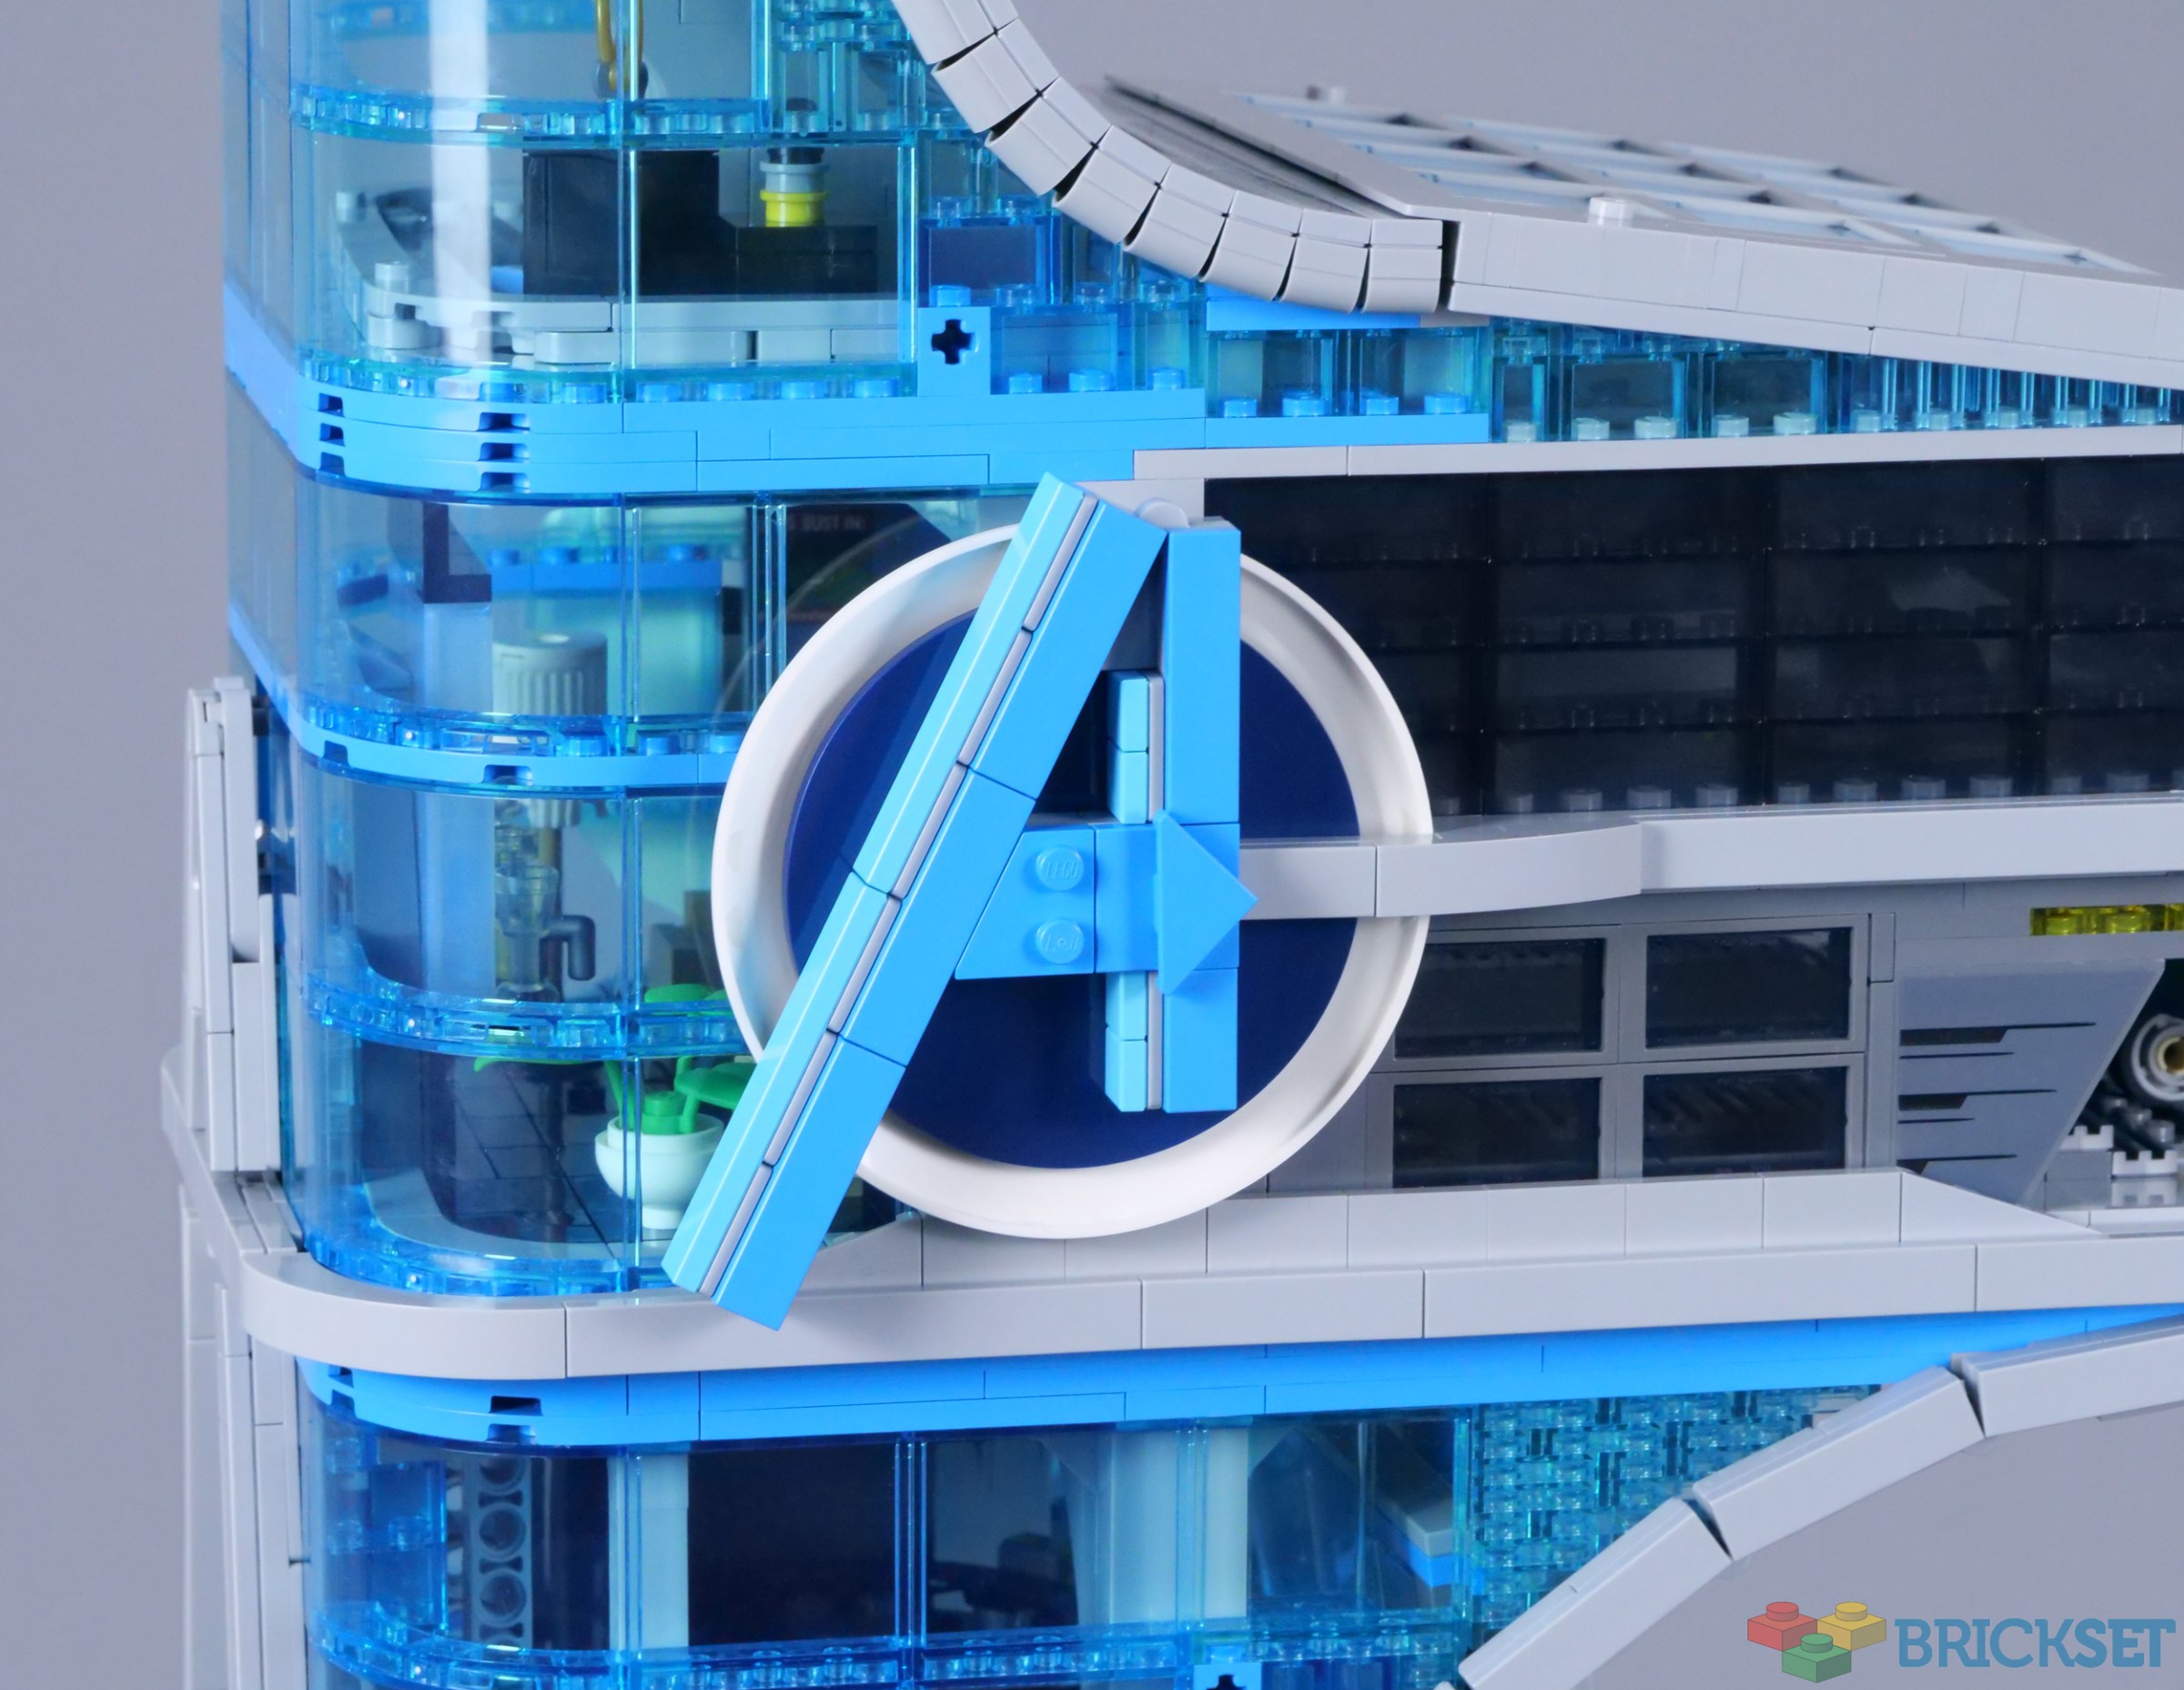 What The Avengers Tower Would Cost In Chicago - Auricchio Law Offices